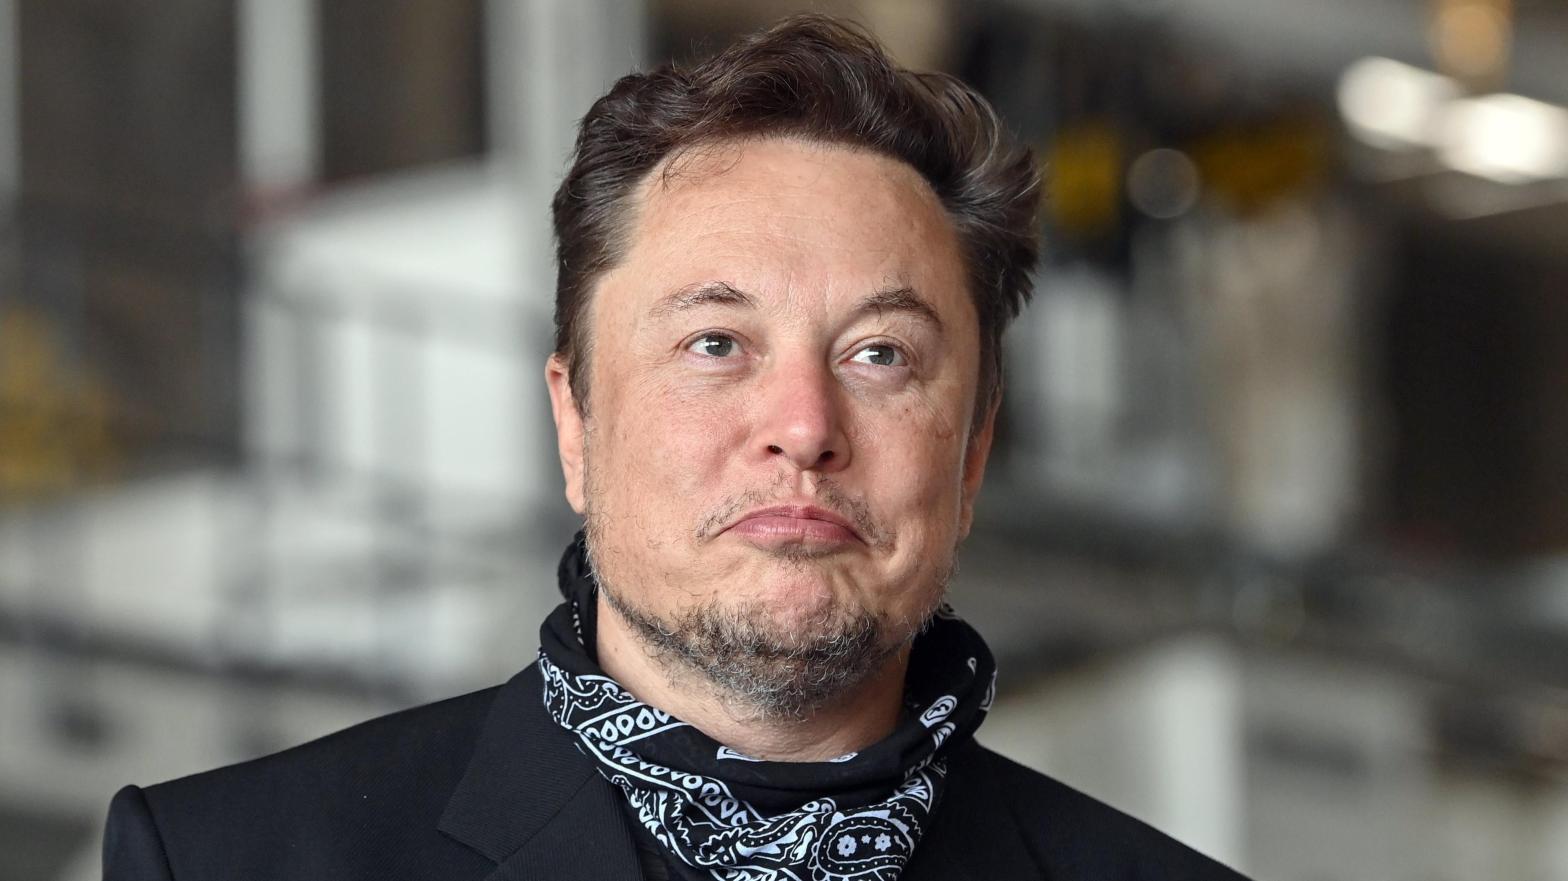 Elon Musk Wants to Make X’s Likes Private to Hide Your Favorite ‘Edgy’ Content